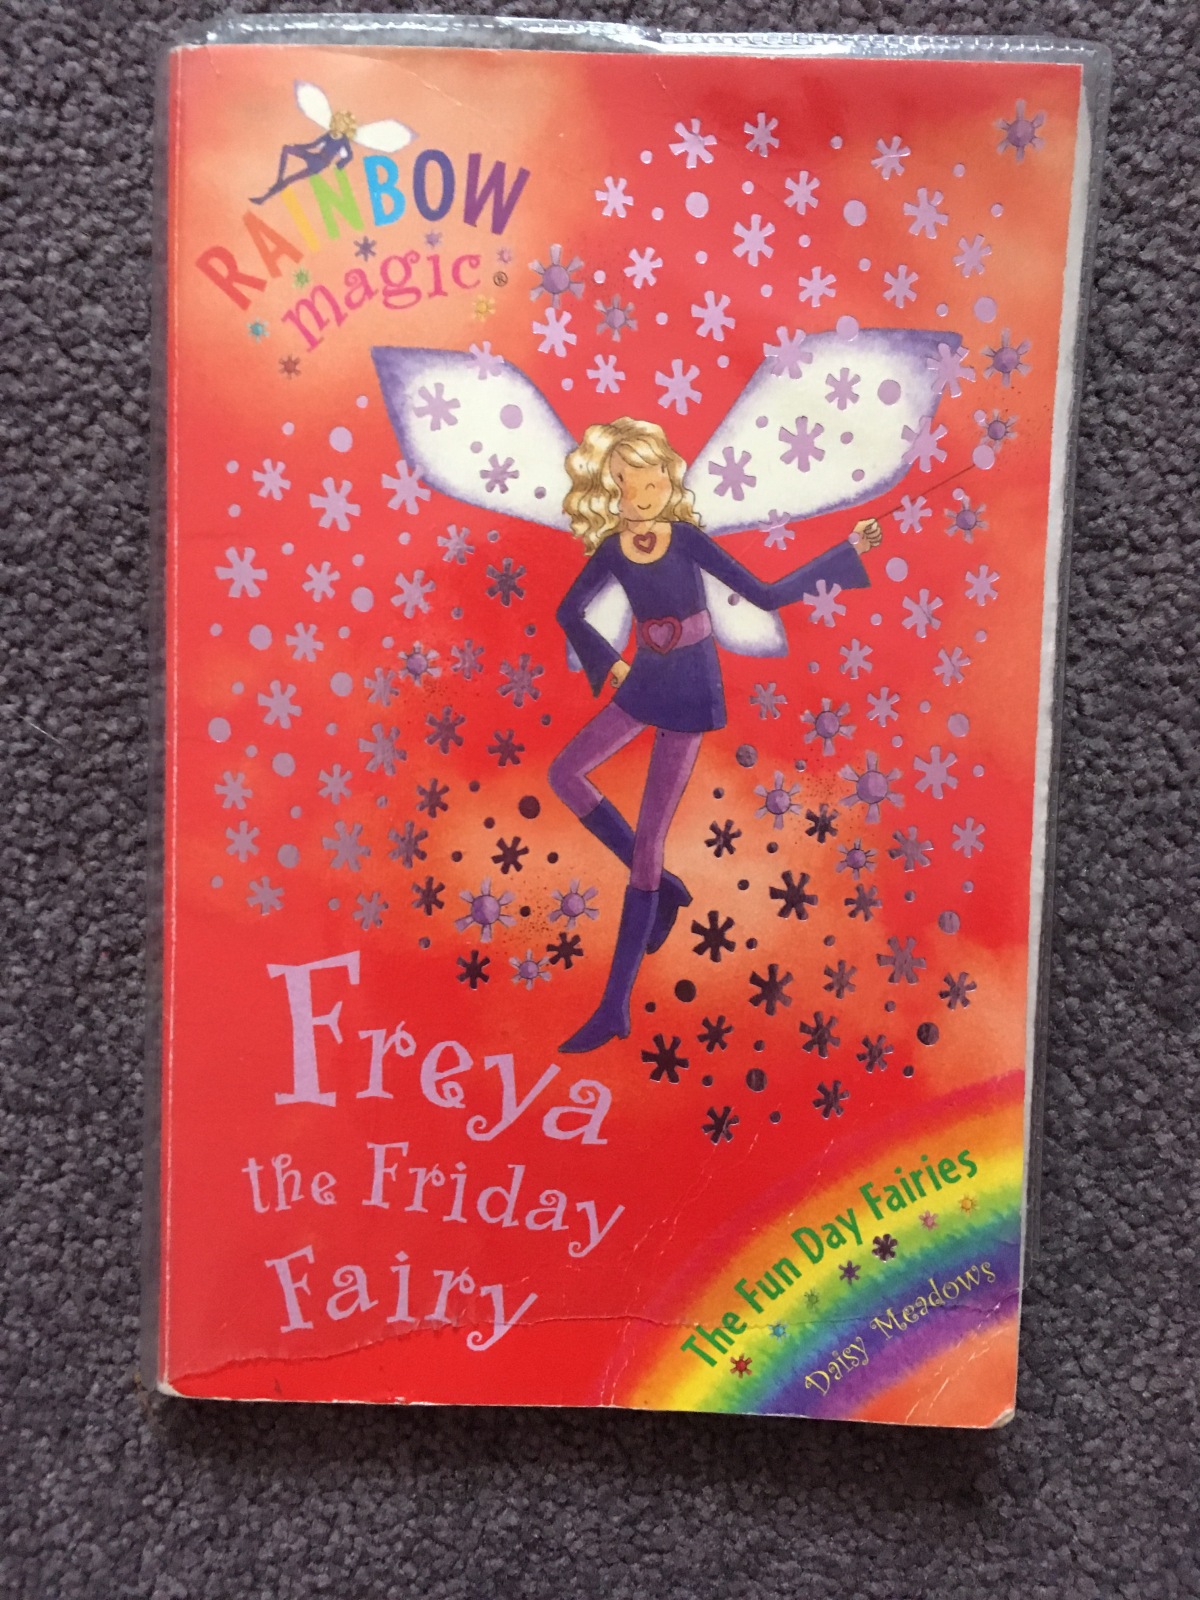 Freya the Friday Fairy by Daisy Meadows, illustrated by Georgie Ripper